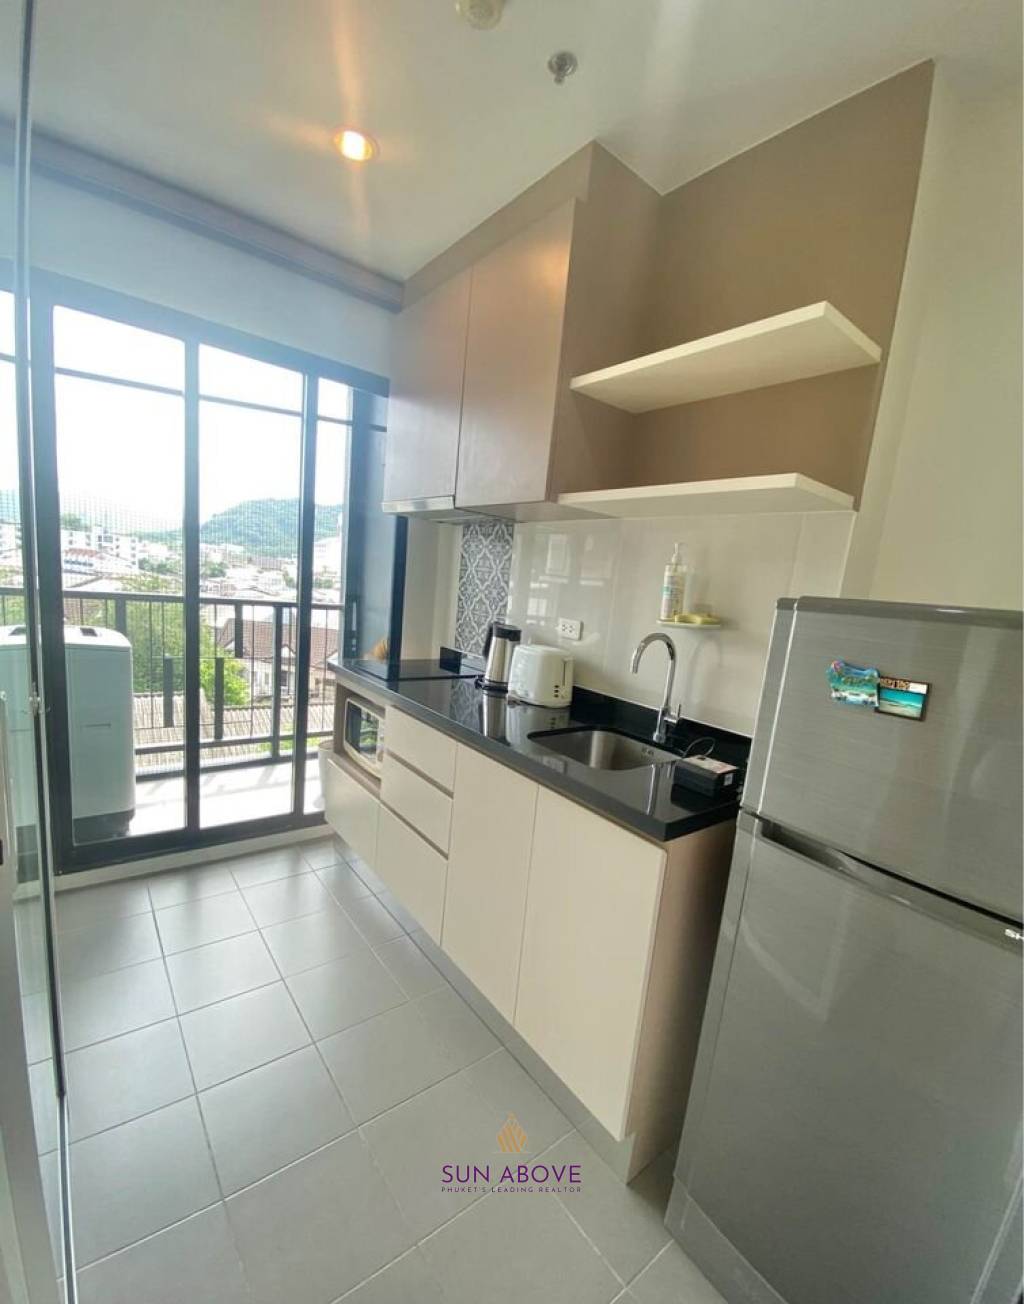 1 Bed 1 Bath The Base Height Phuket For Rent